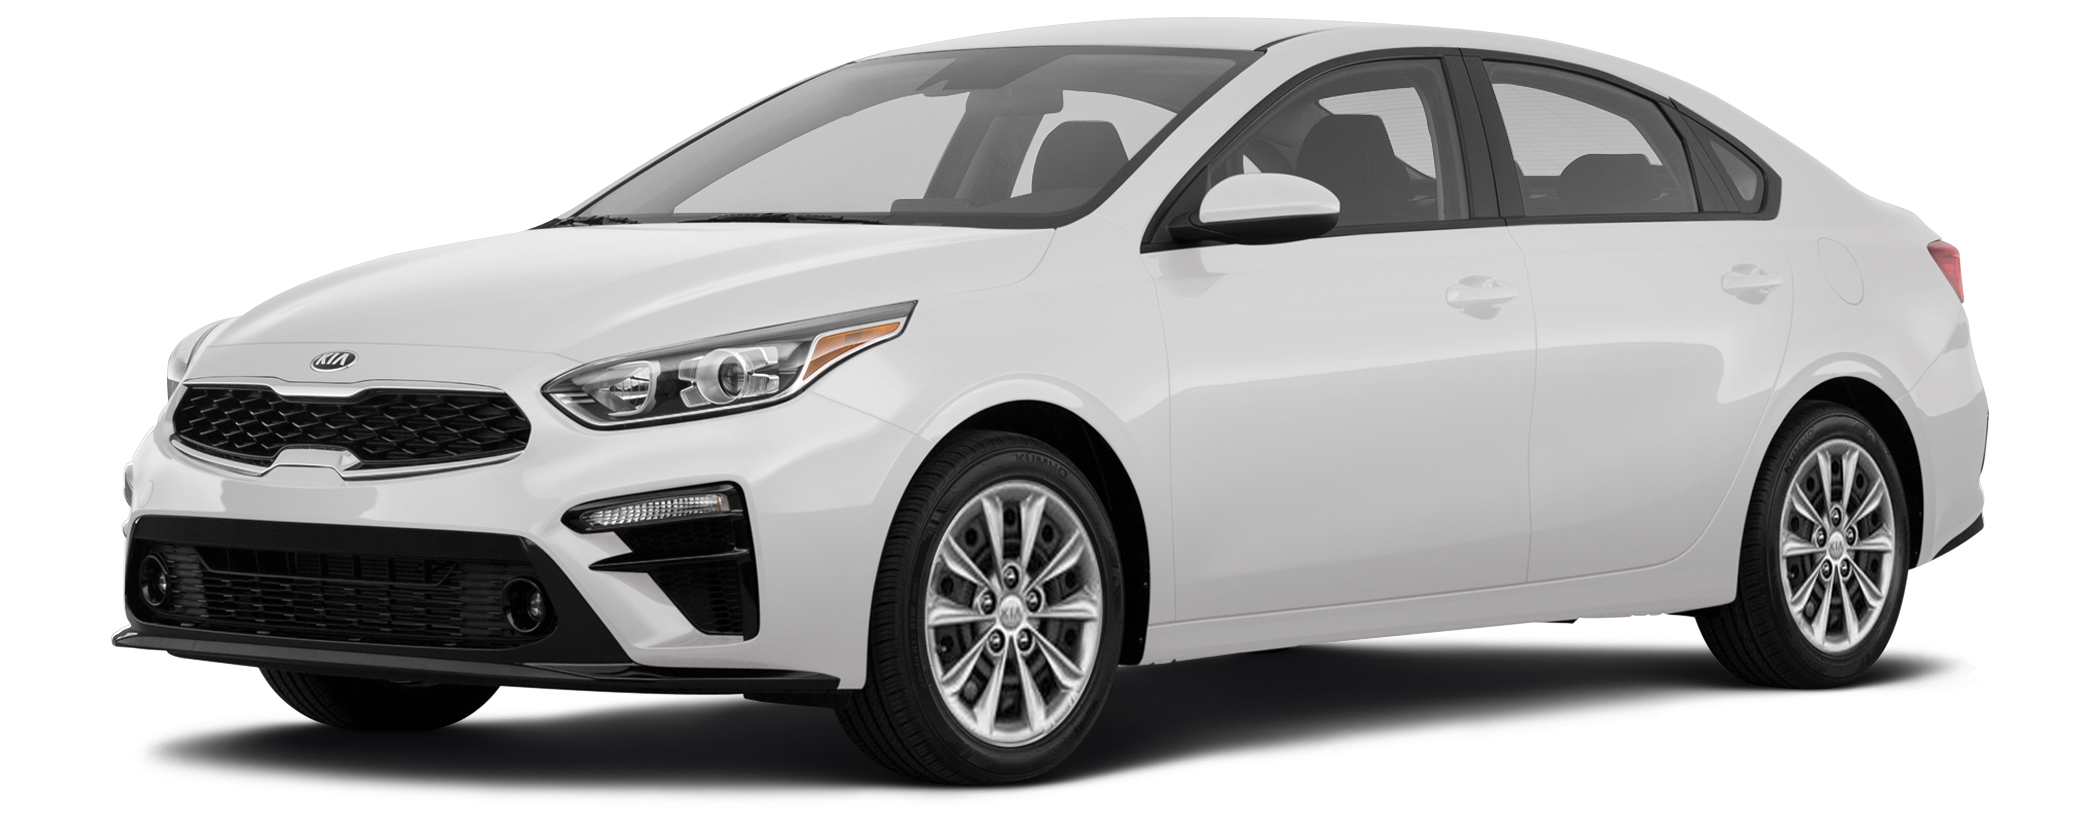 2019 Kia Forte Incentives, Specials & Offers in Dothan AL